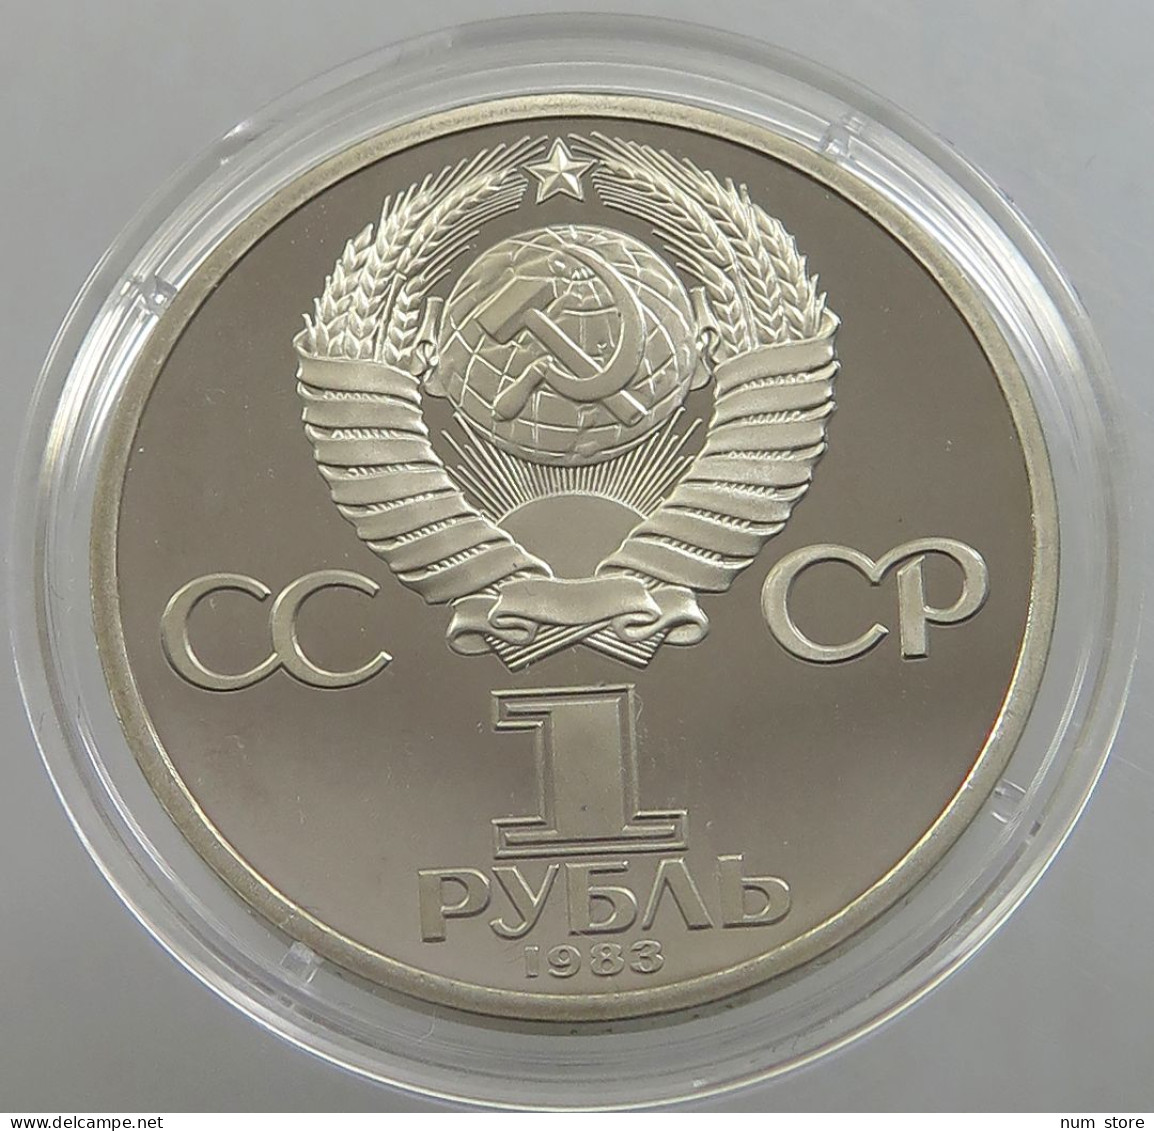 RUSSIA USSR 1 ROUBLE 1983 FEDOROV ORIGINAL PROOF #sm14 0607 - Russia